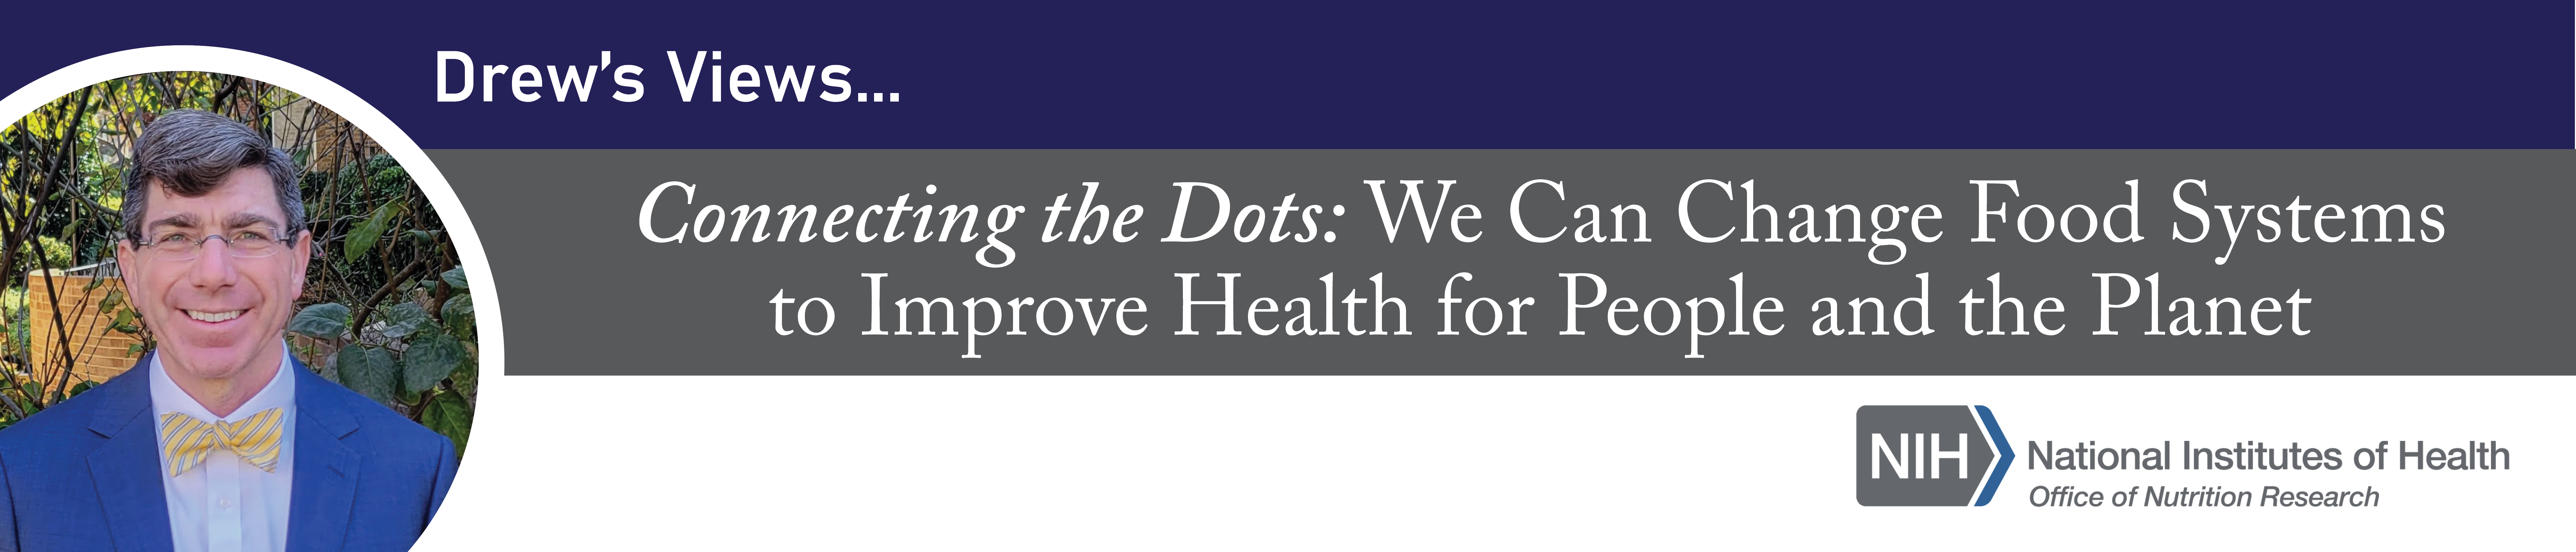 Header for blog Drew's Views: Connecting the Dots: We Can Change Food Systems to Improve Health for People and the Planet